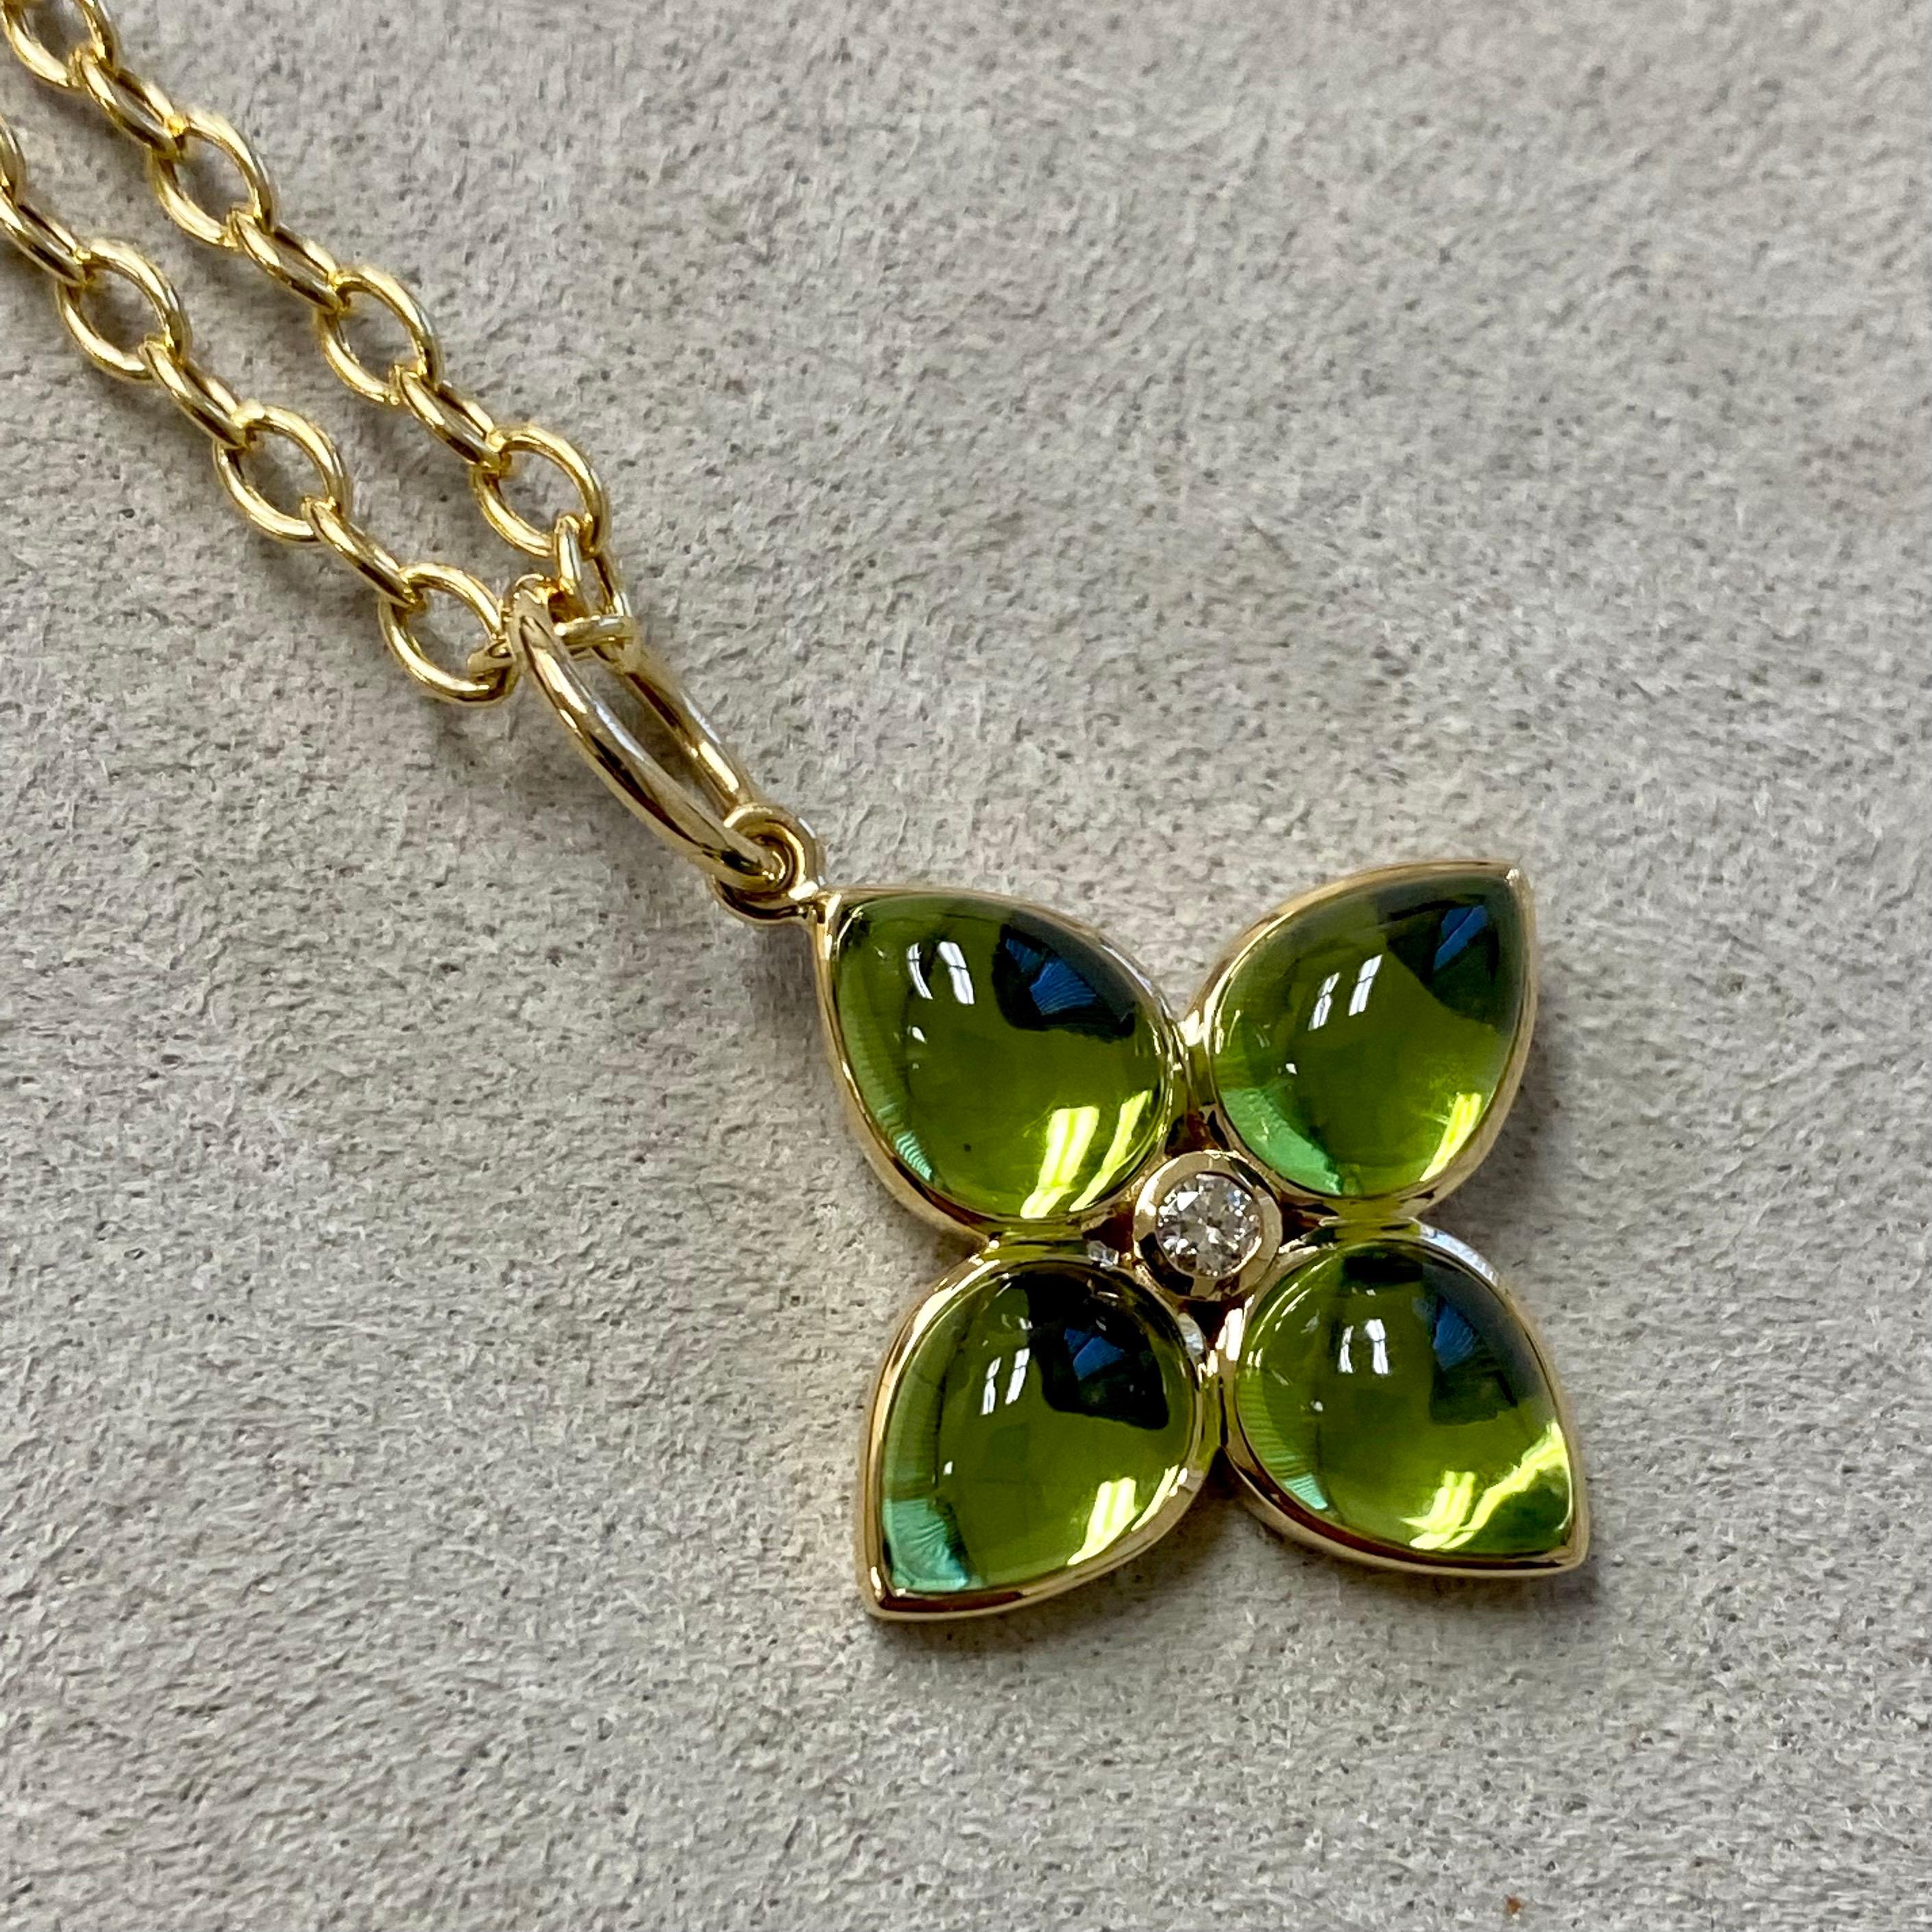 Created in 18 karat yellow gold
Peridot 7 carats approx.
Champagne diamond 0.04 carat approx.
Chain sold separately


About the Designers ~ Dharmesh & Namrata

Drawing inspiration from little things, Dharmesh & Namrata Kothari have created an